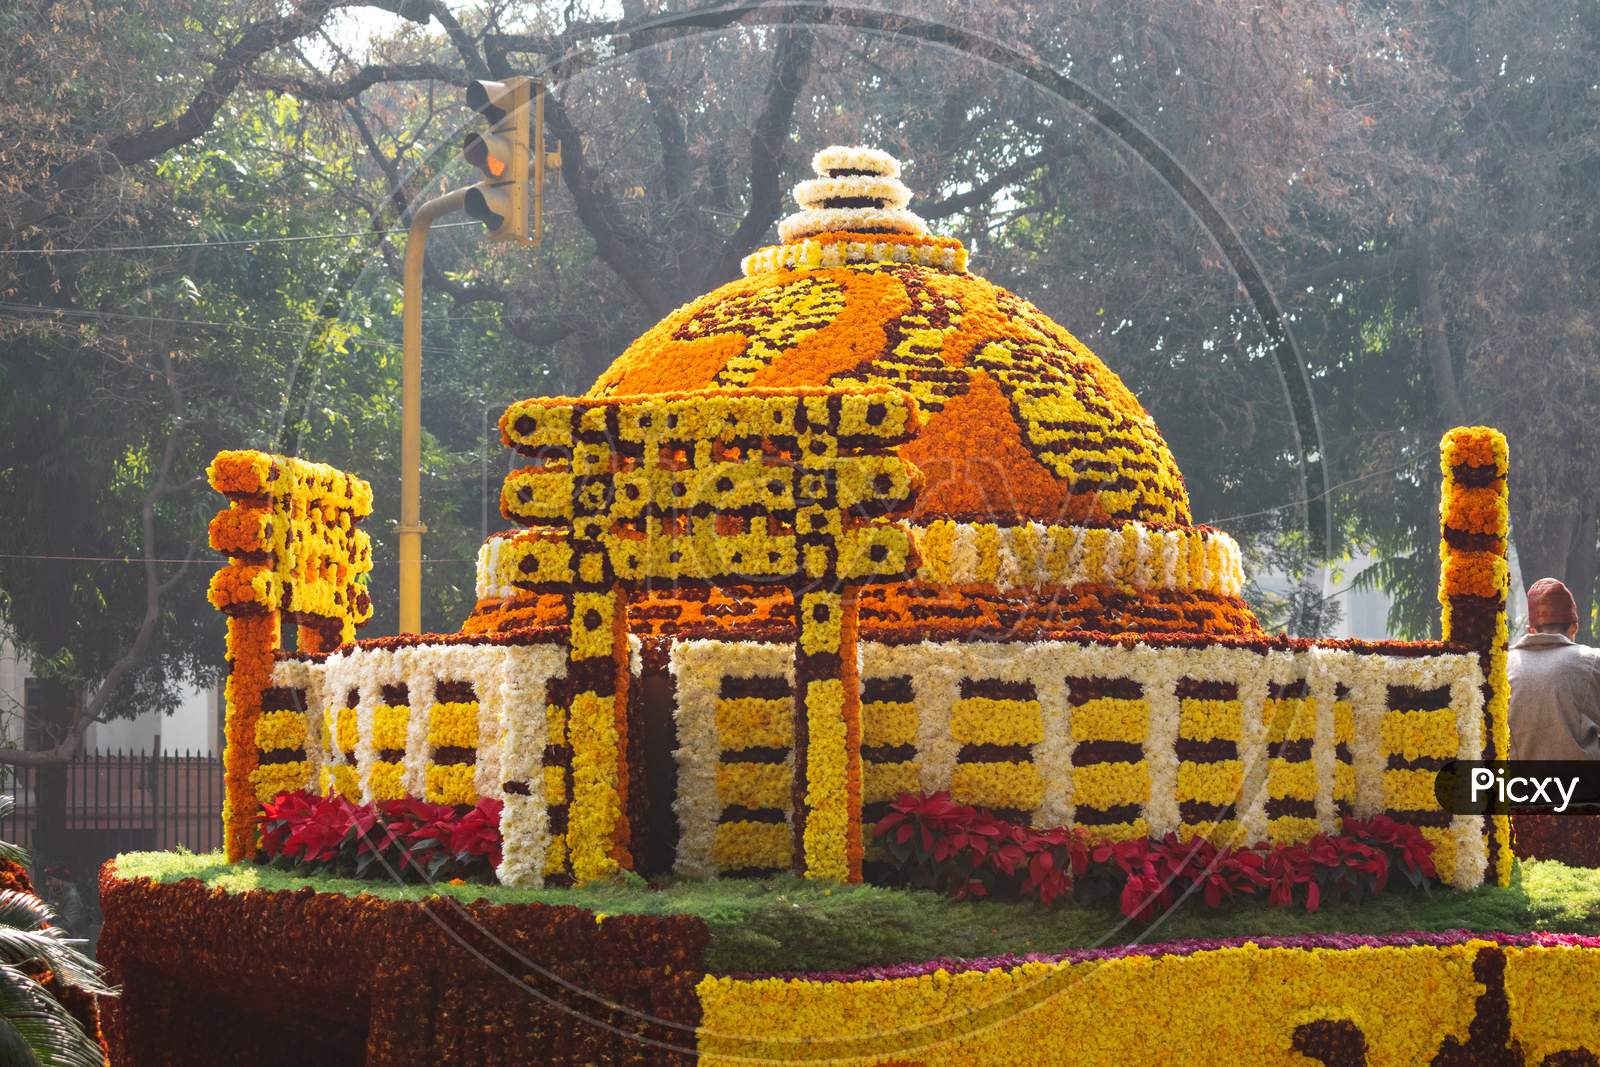 Decorated miniature of Vishwa Shanti Stupa on Tableau Of Central Public Works Department CPWD udyan On 71st Republic Day 2020